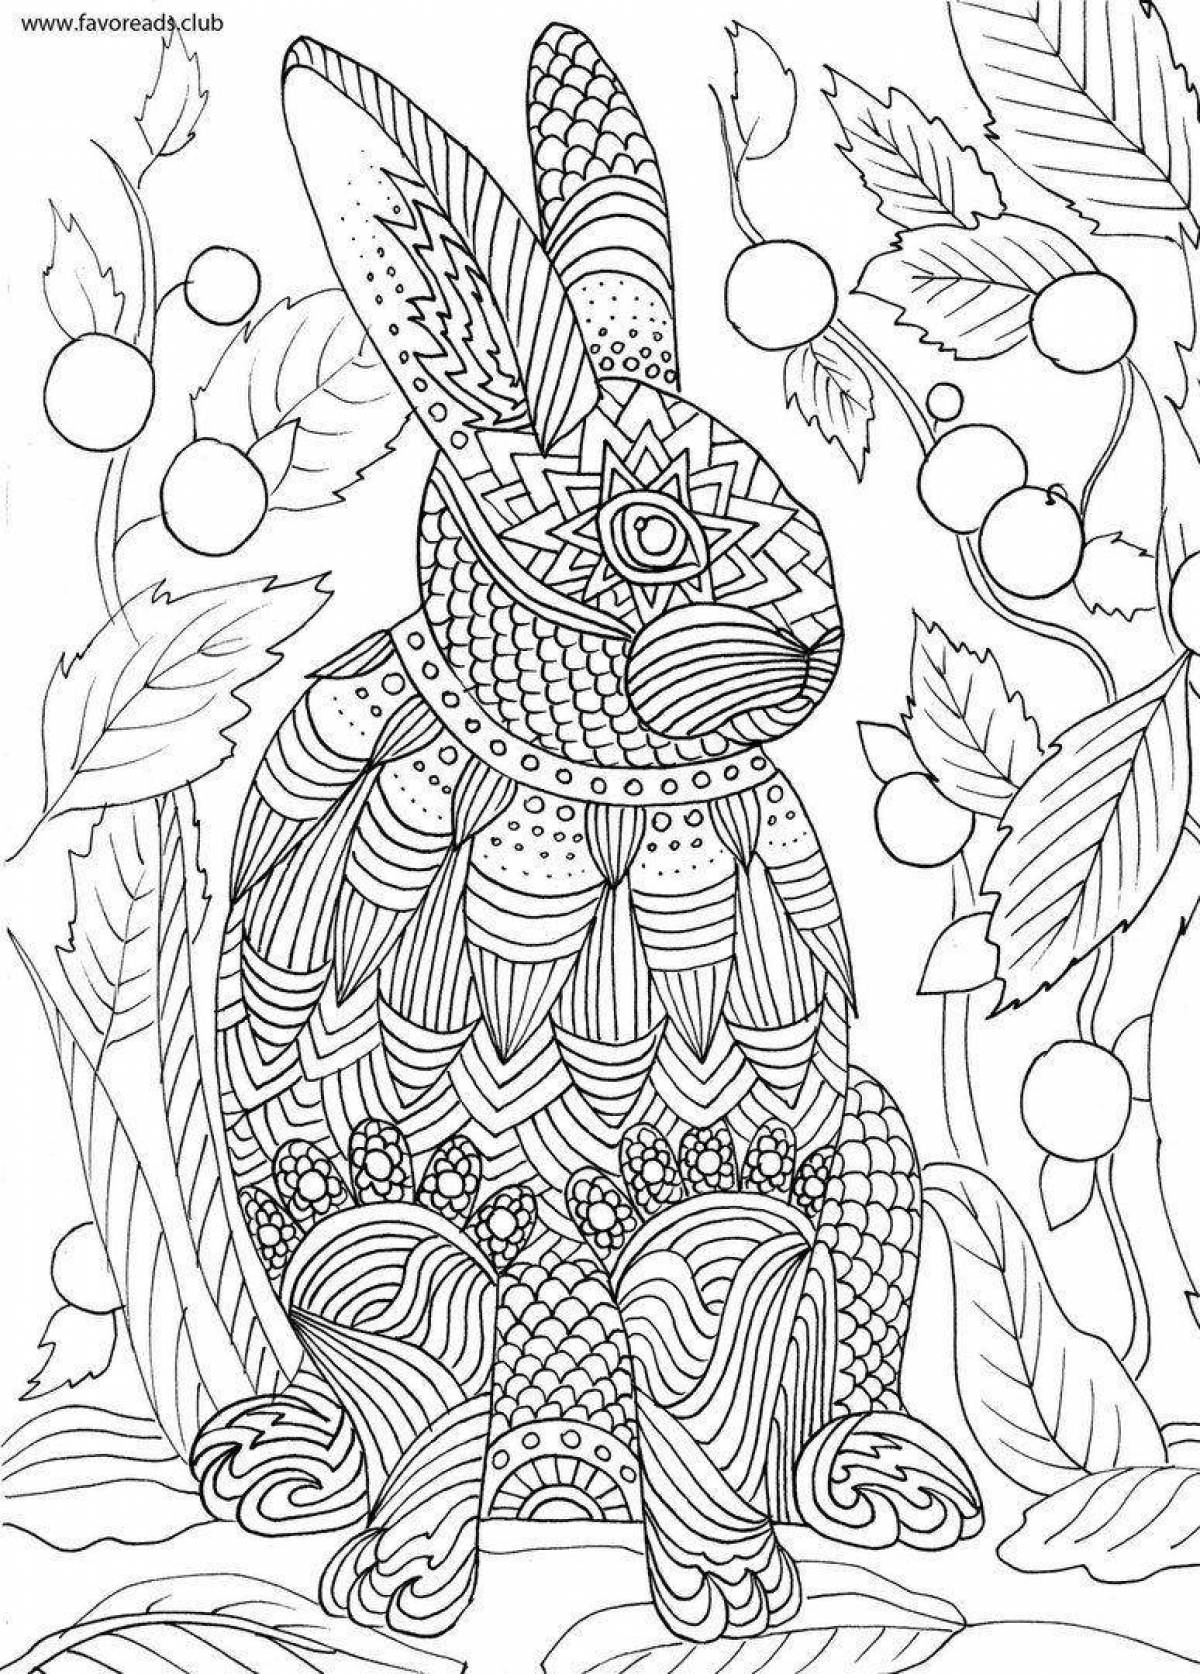 Exciting anti-stress rabbit coloring book